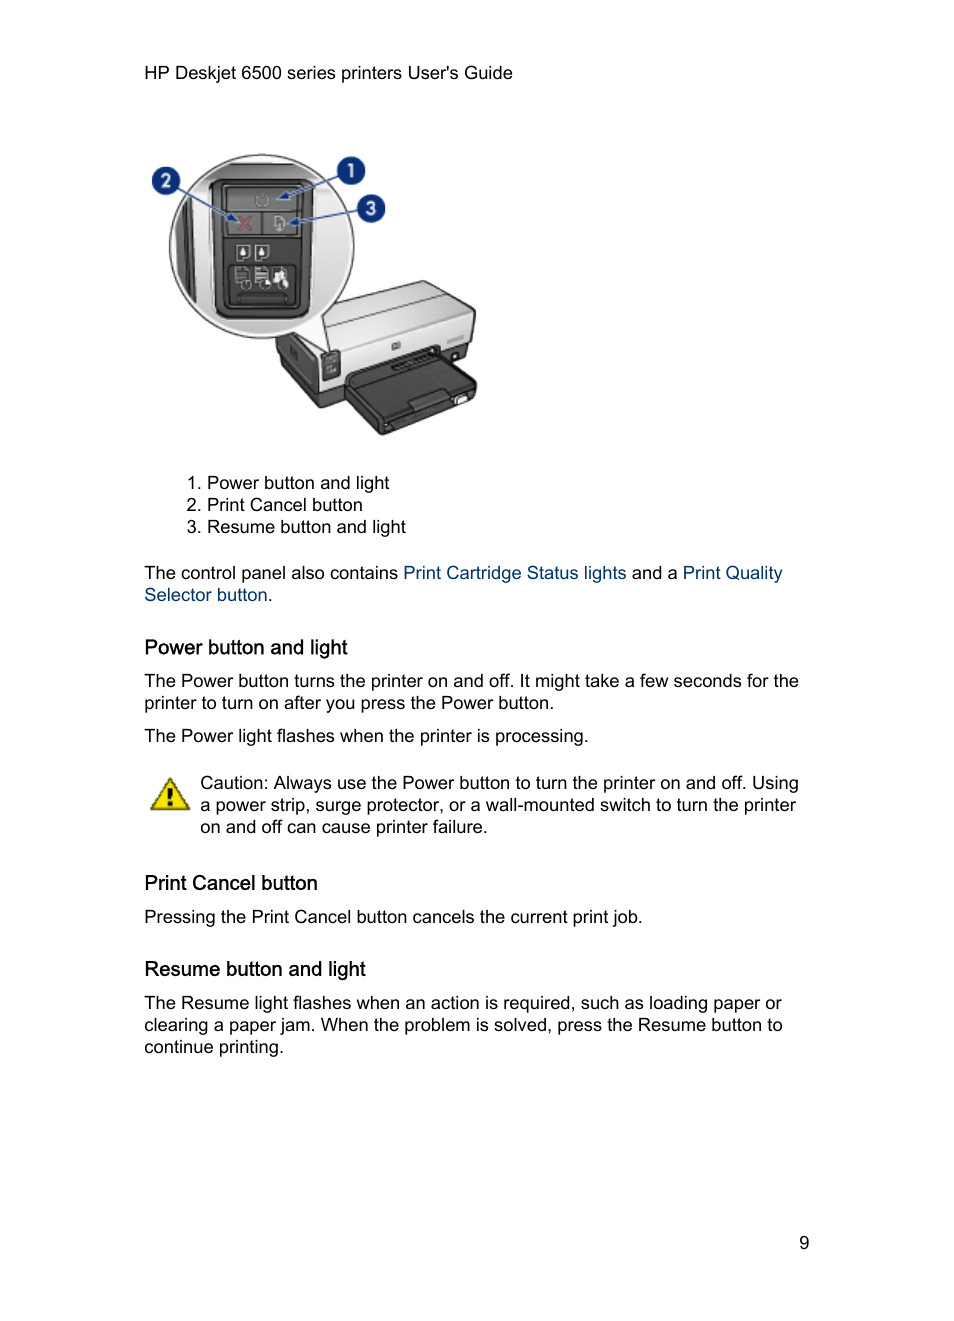 Power button and light, cancel button, Resume button and light | HP Deskjet 6540 Color Inkjet Printer User Manual | Page 9 / 195